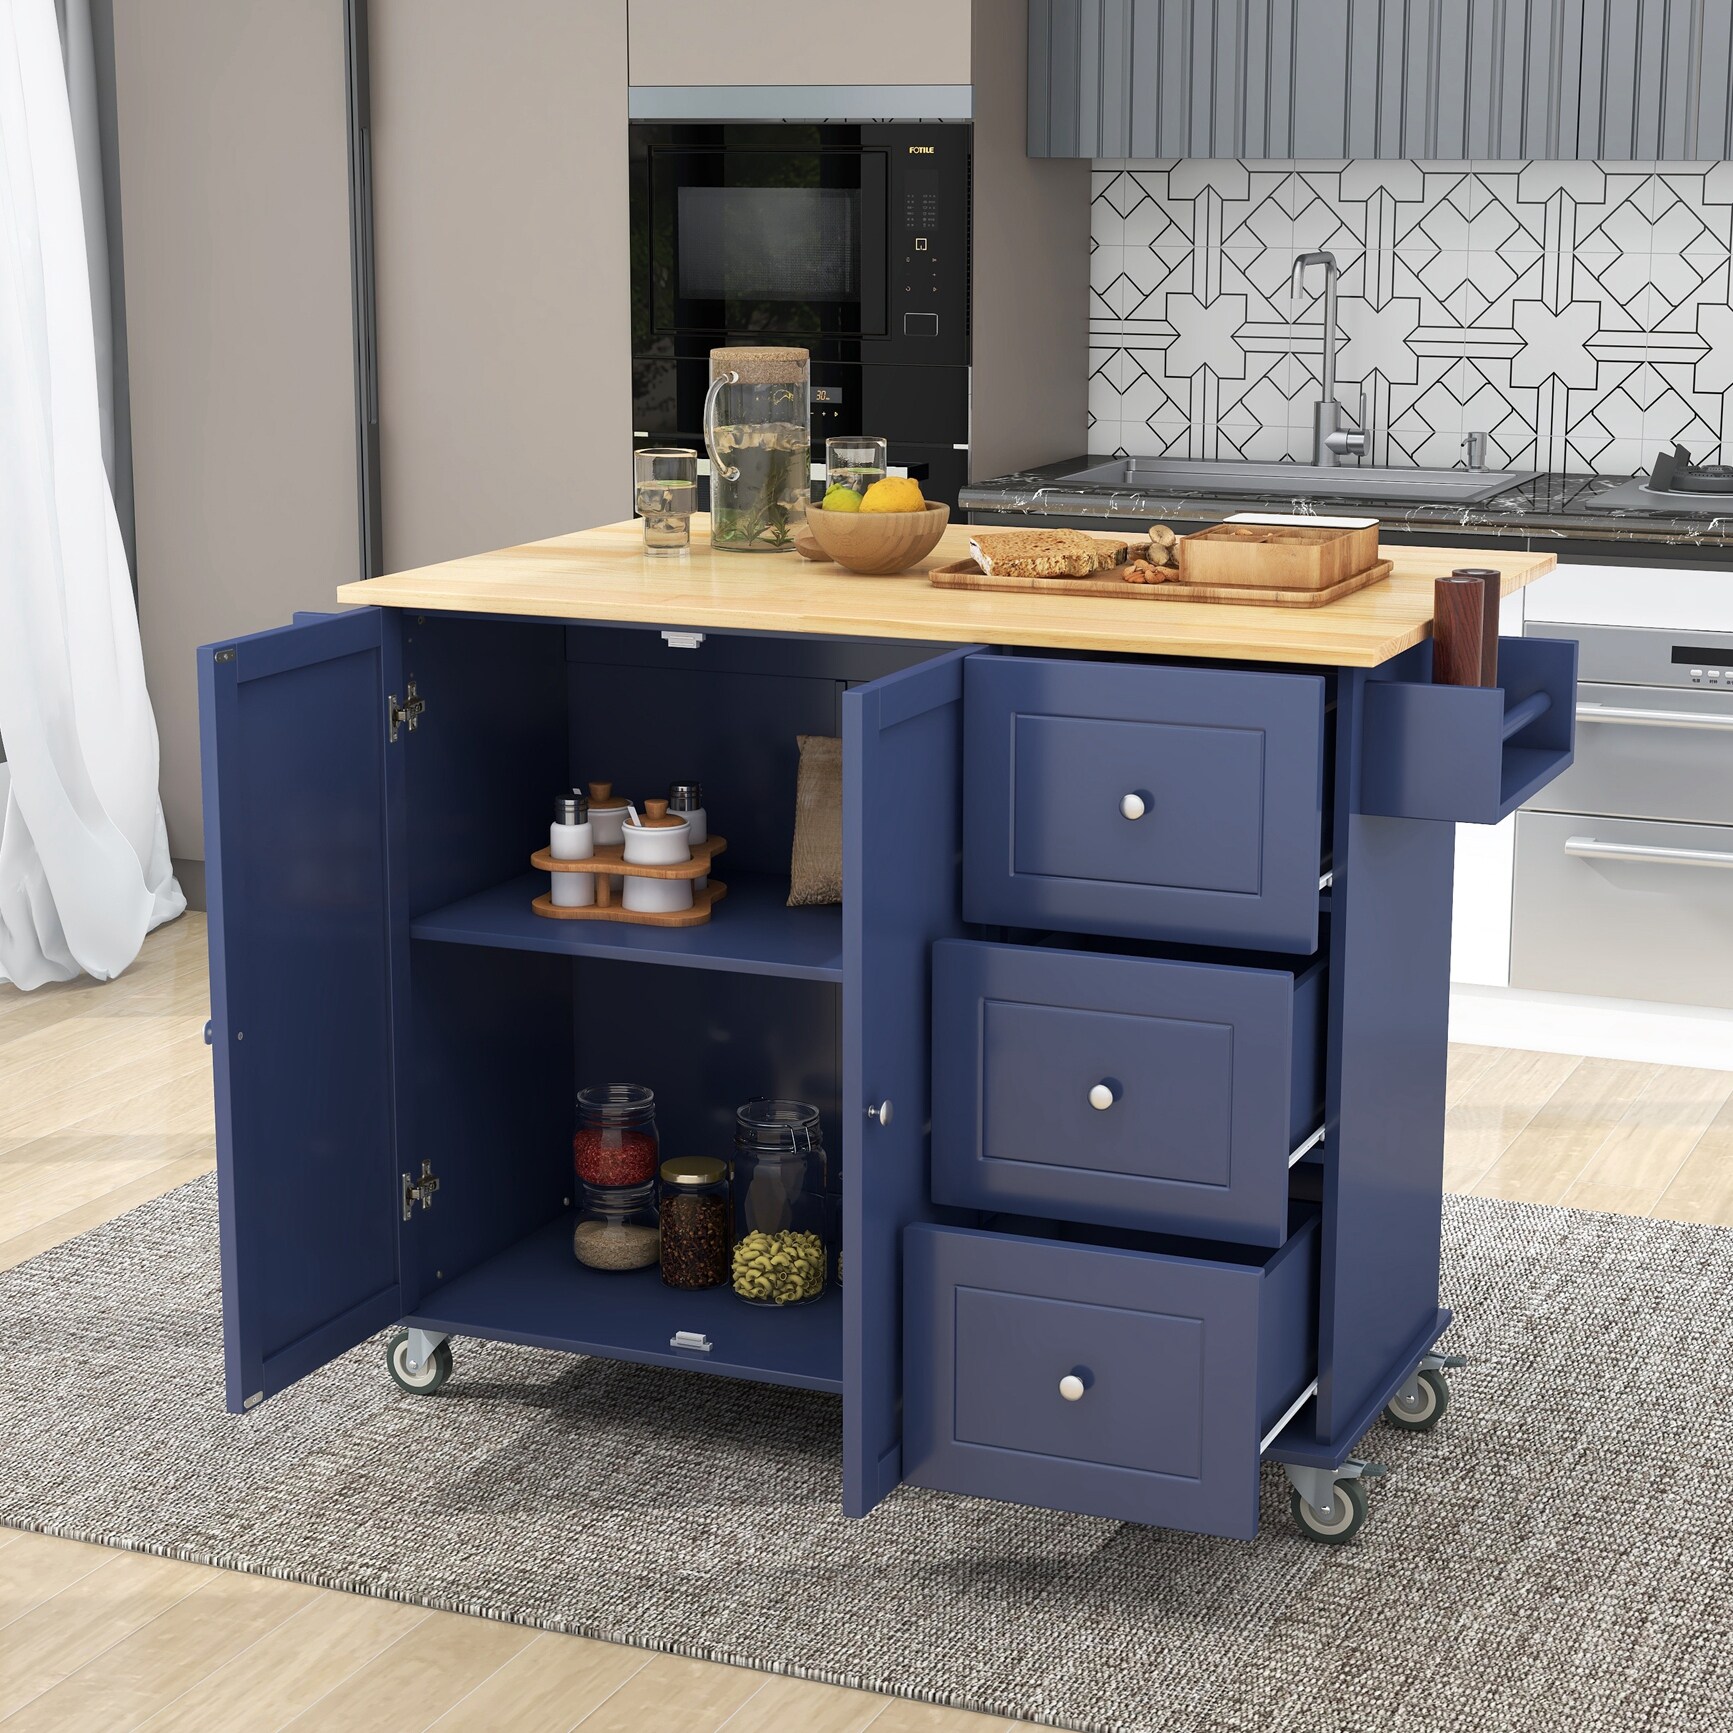 https://ak1.ostkcdn.com/images/products/is/images/direct/045f57394c48949a33a723f26aa963a793dea634/Mobile-Kitchen-Island-Cart-with-Solid-Wood-Drop-Leaf-Top.jpg